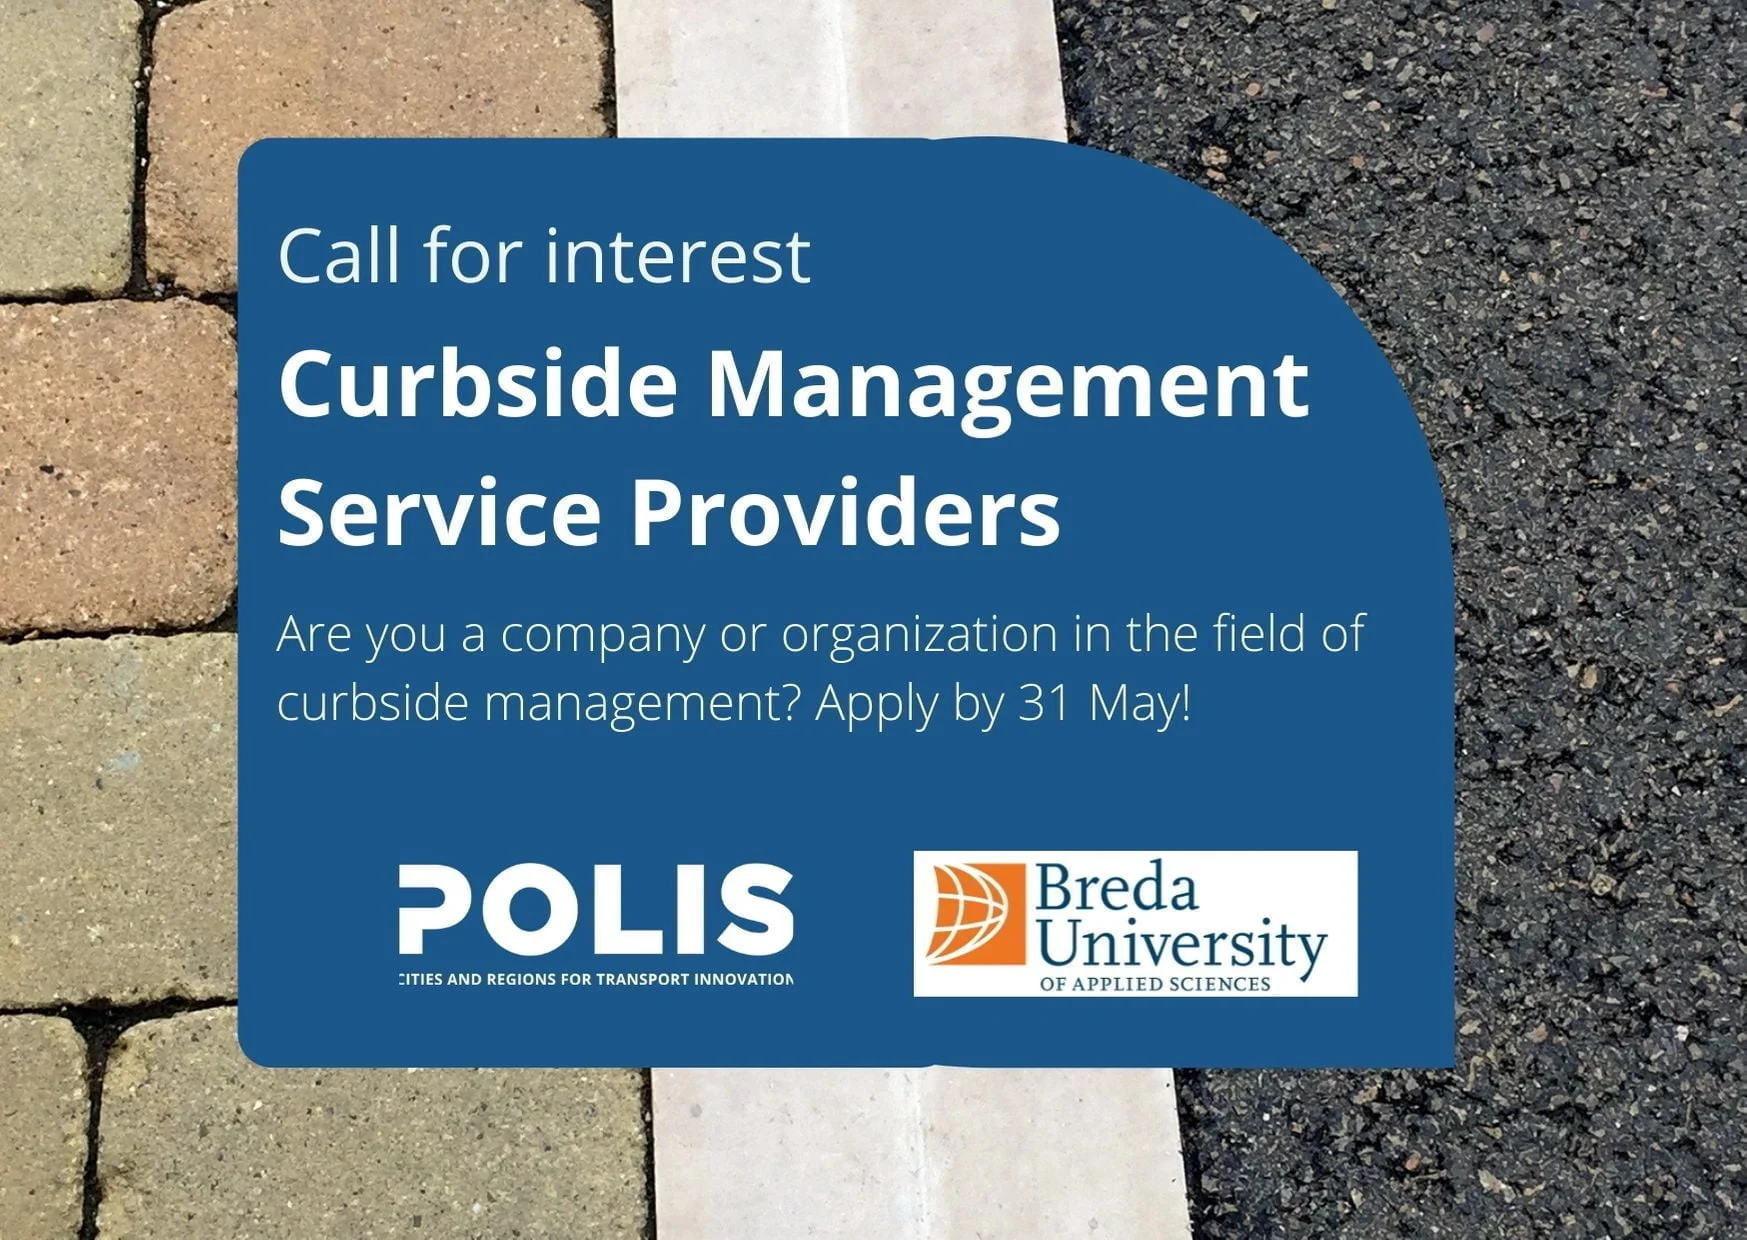 Call for Interest: Curbside Management Services Providers